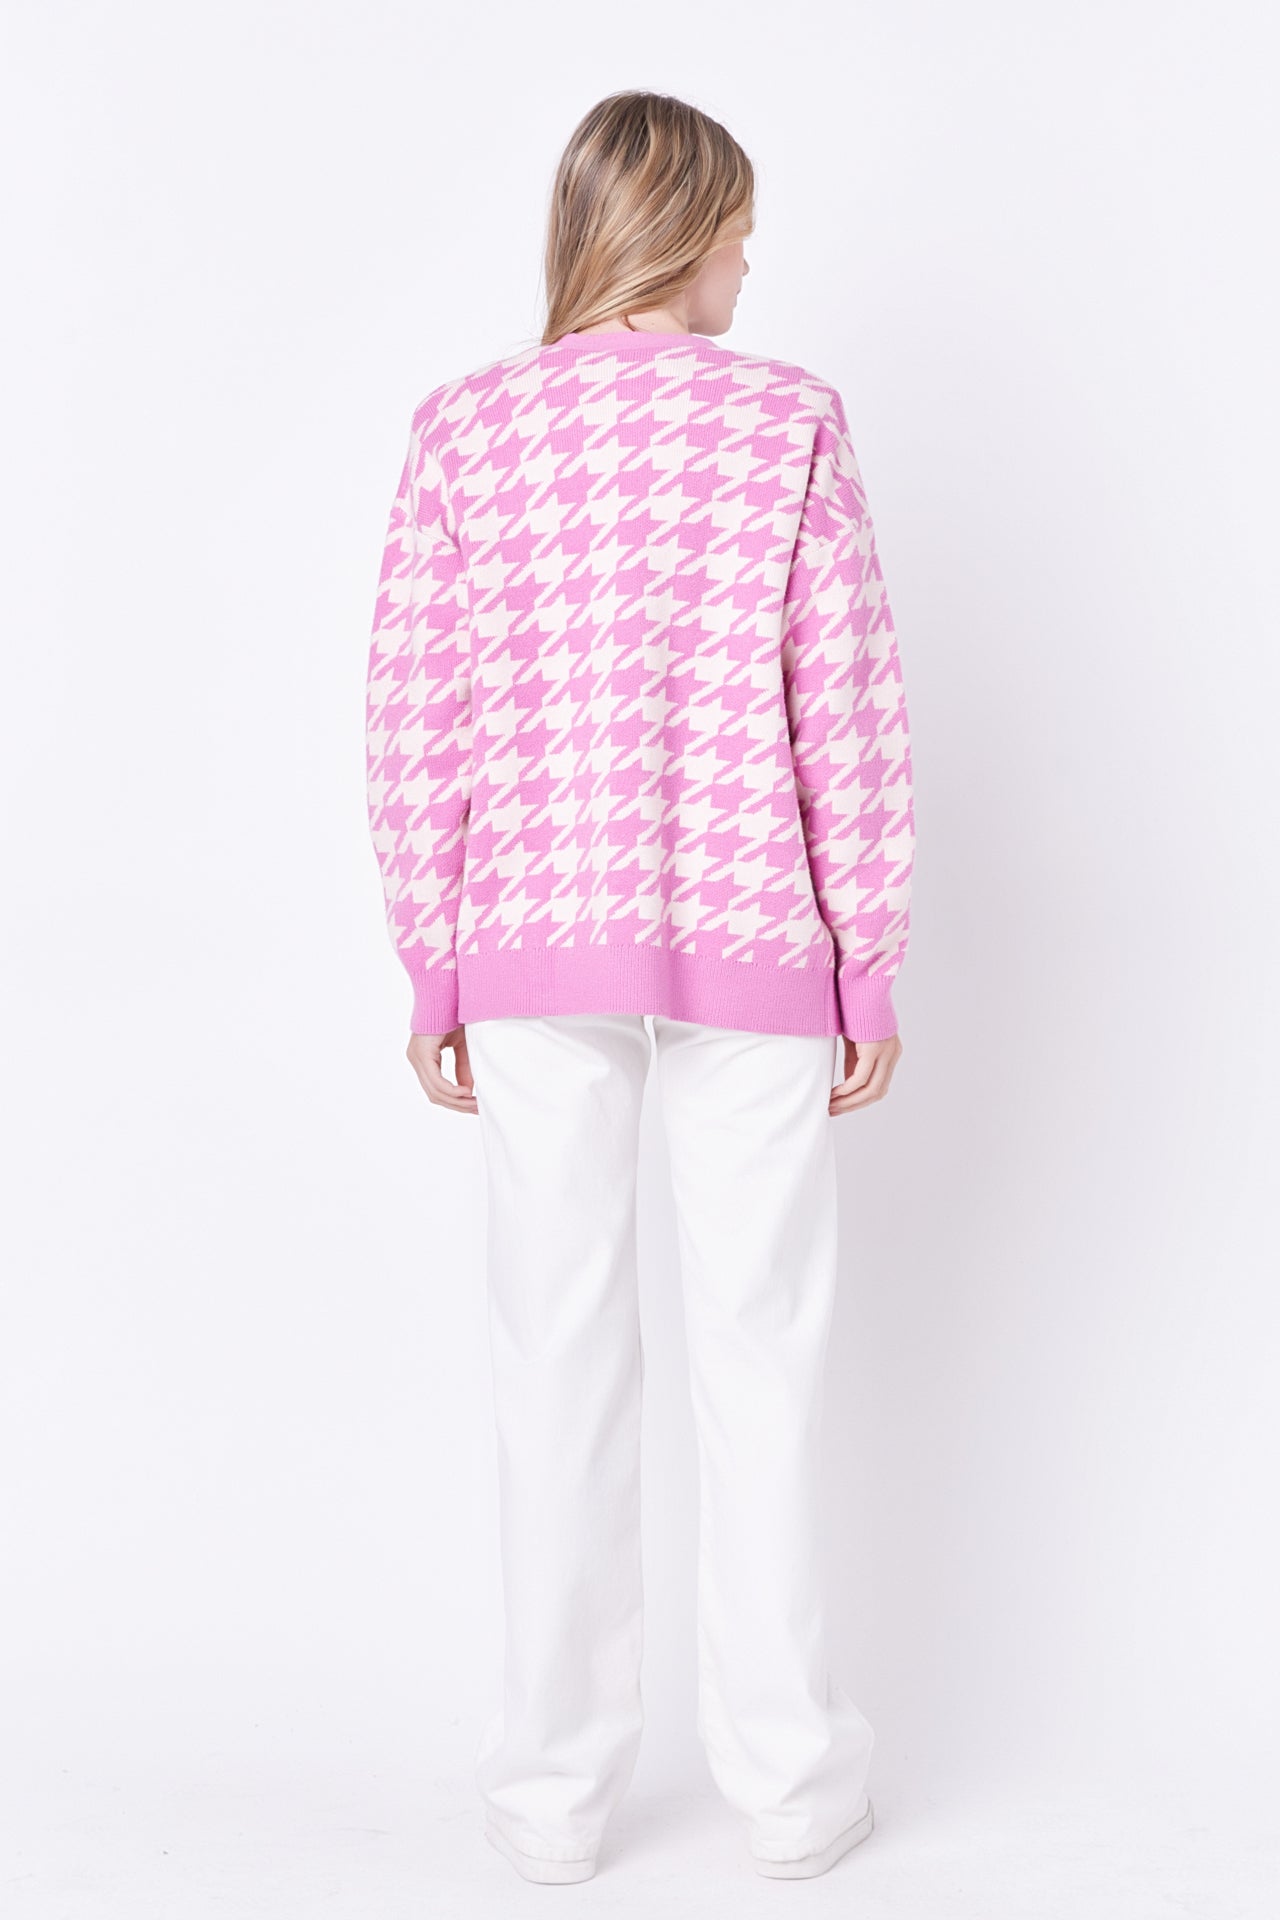 ENGLISH FACTORY - Knit Houndstooth Cardigan - SWEATERS & KNITS available at Objectrare